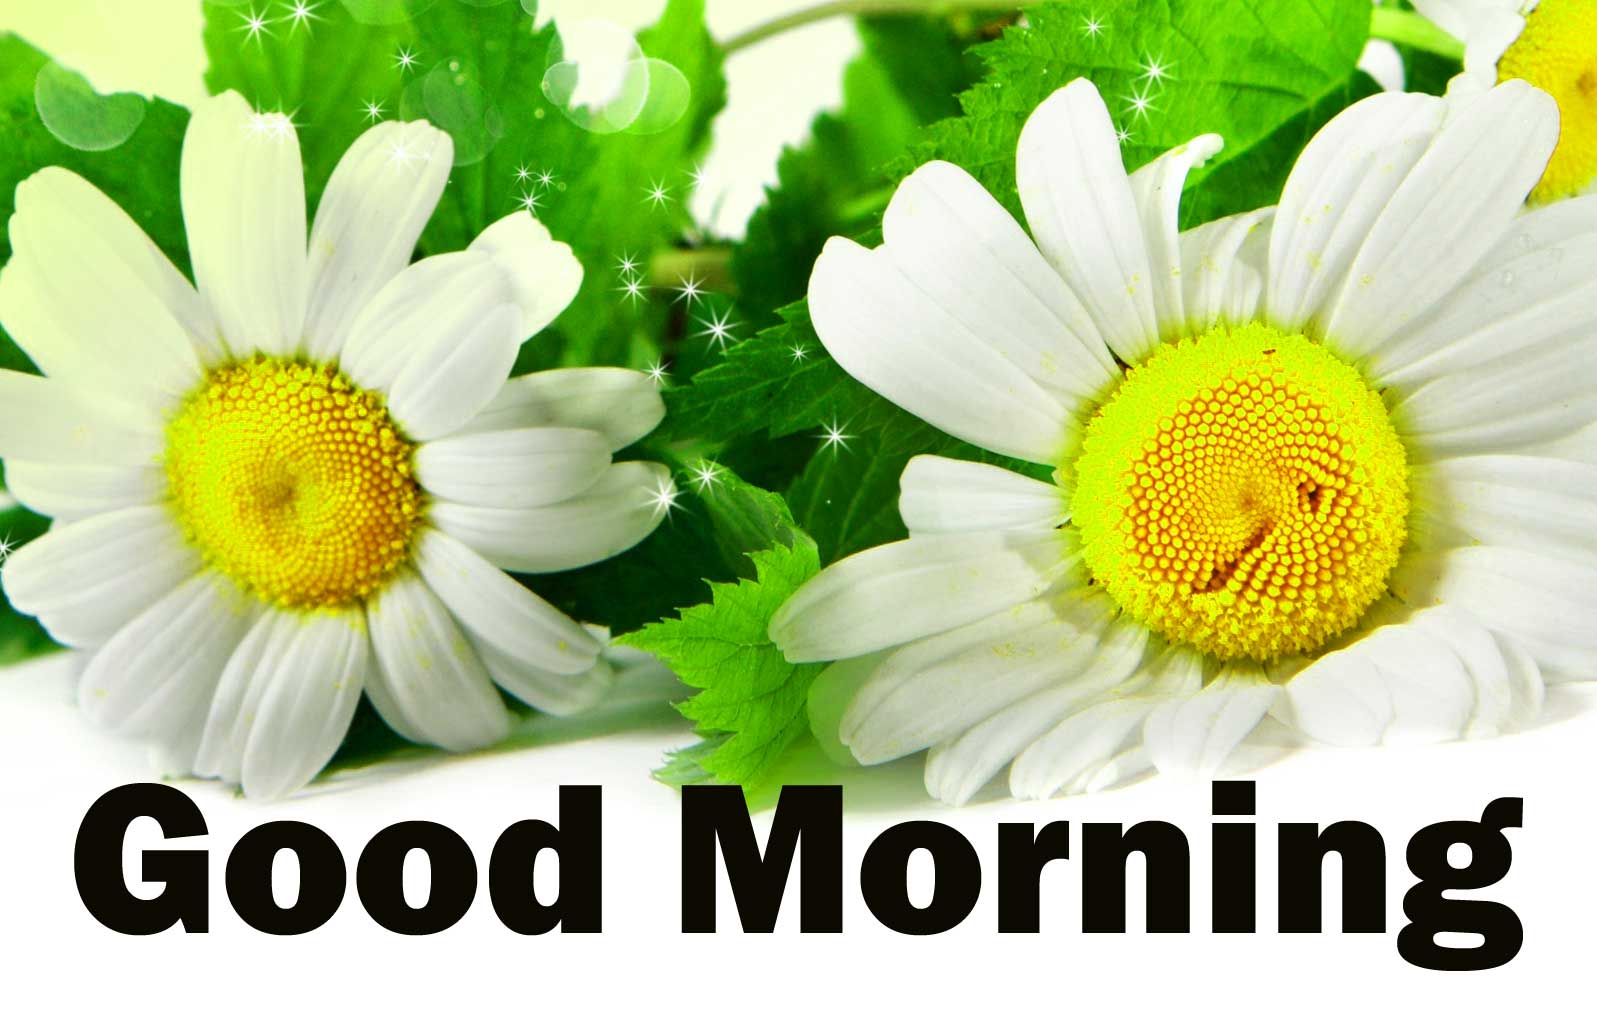 New 1080p Flower Good Morning pics Pictures Download 